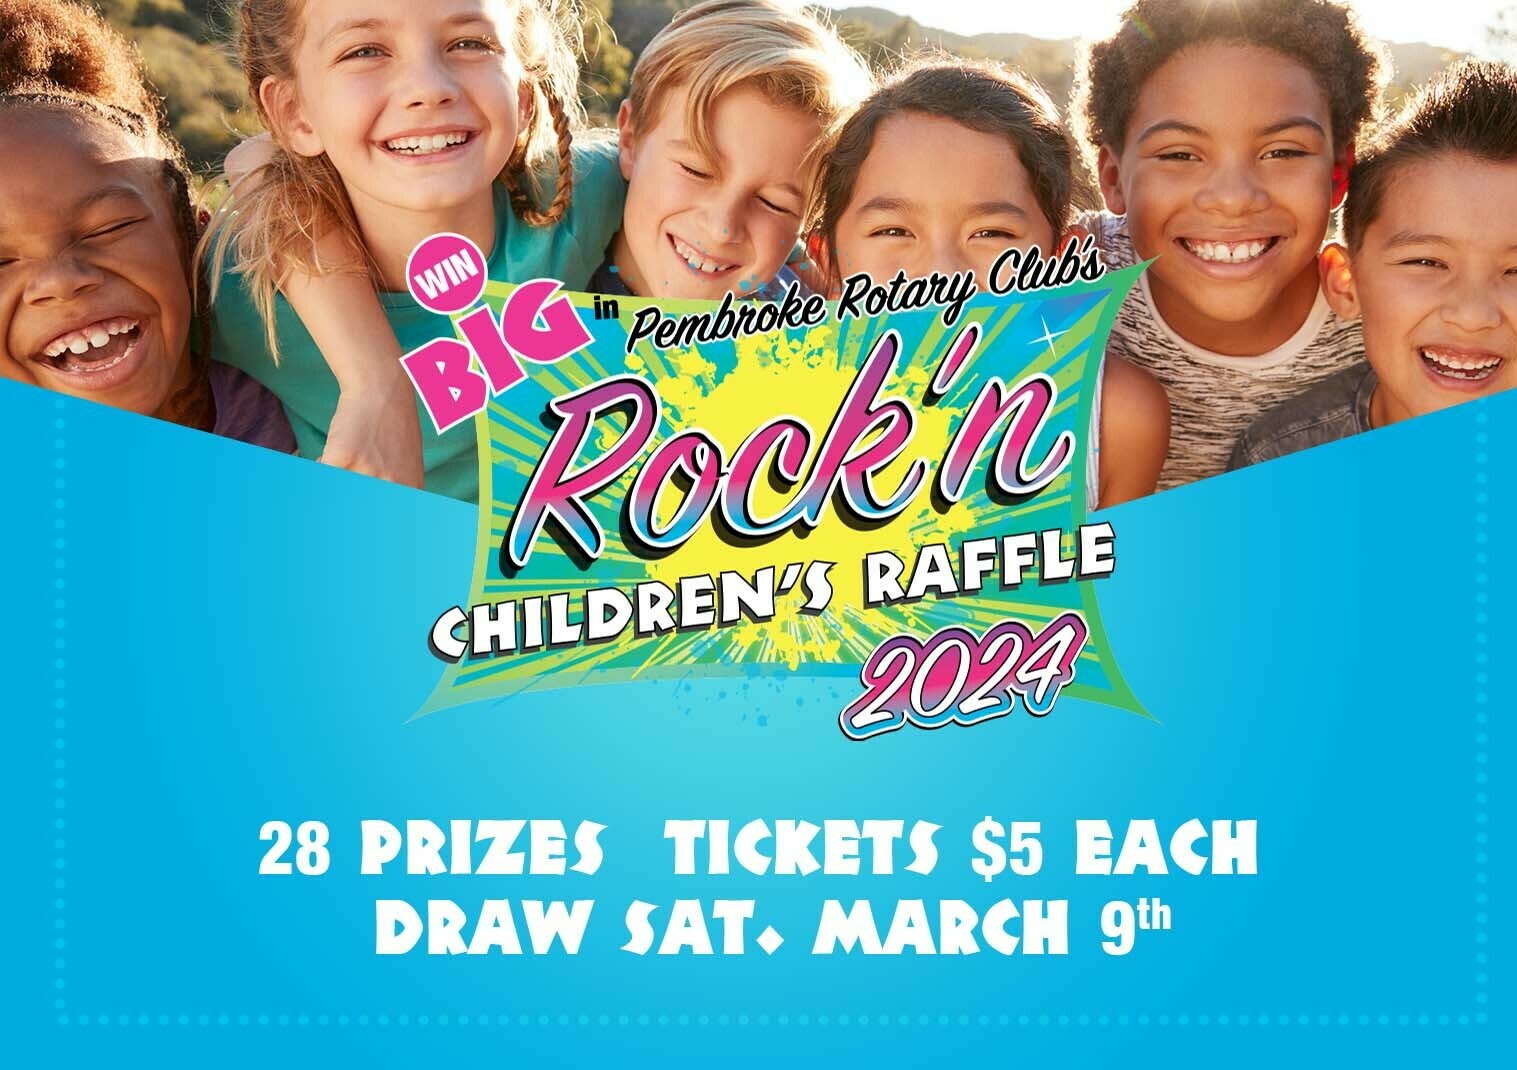 Support Our Students and Win Big With The Pembroke Rotary Club's Rock'n Children's Raffle